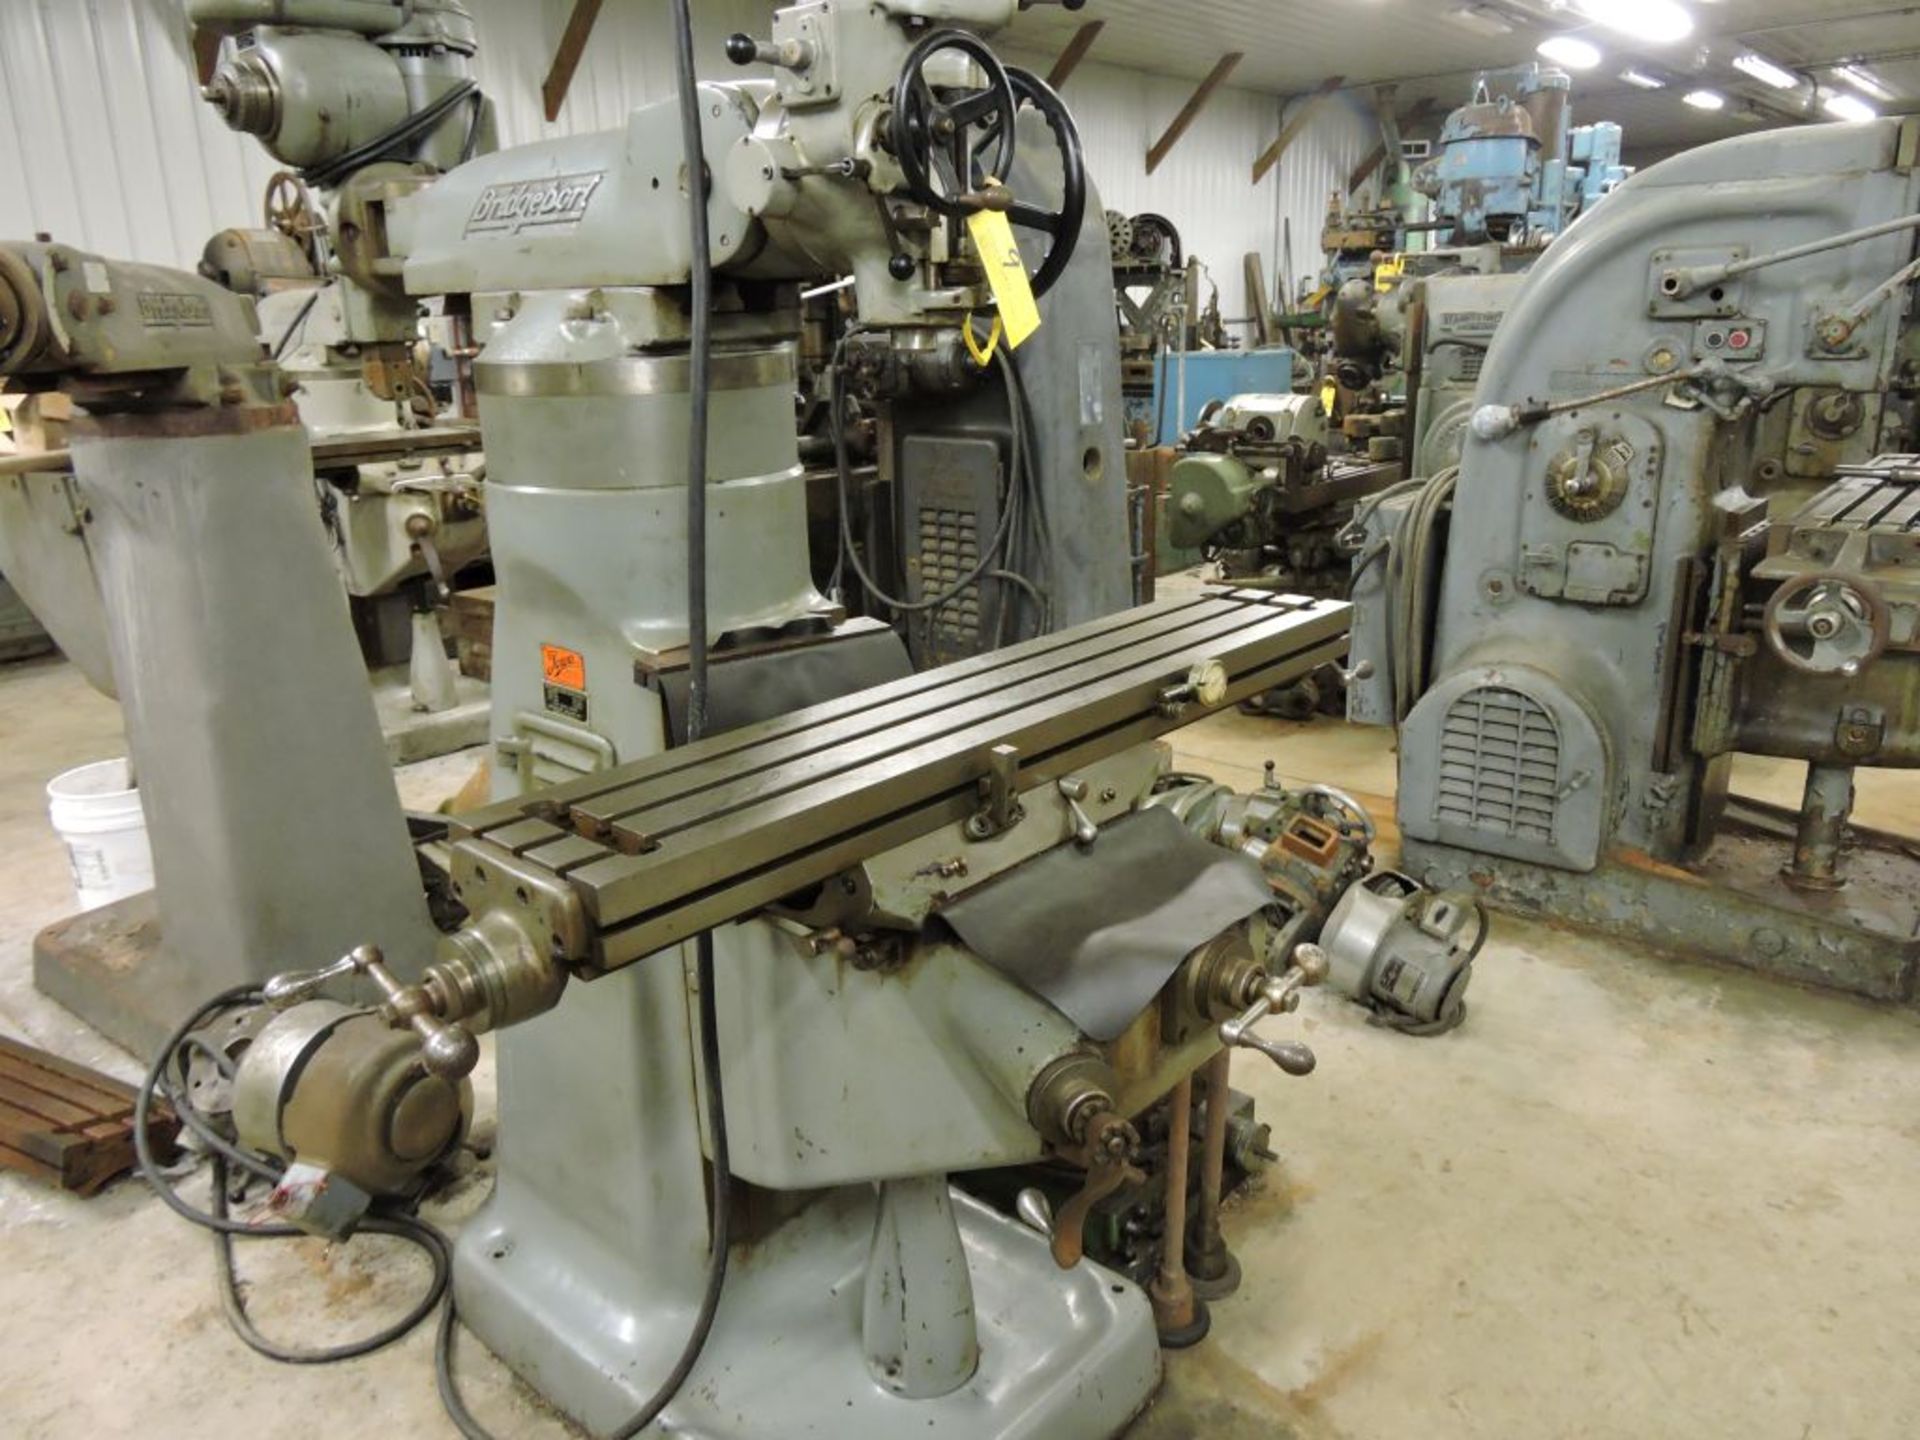 Bridgeport mill, model 12-BR, sn 83978, 9" x 48" bed, manual (not down power), shaping attachment. - Image 11 of 15